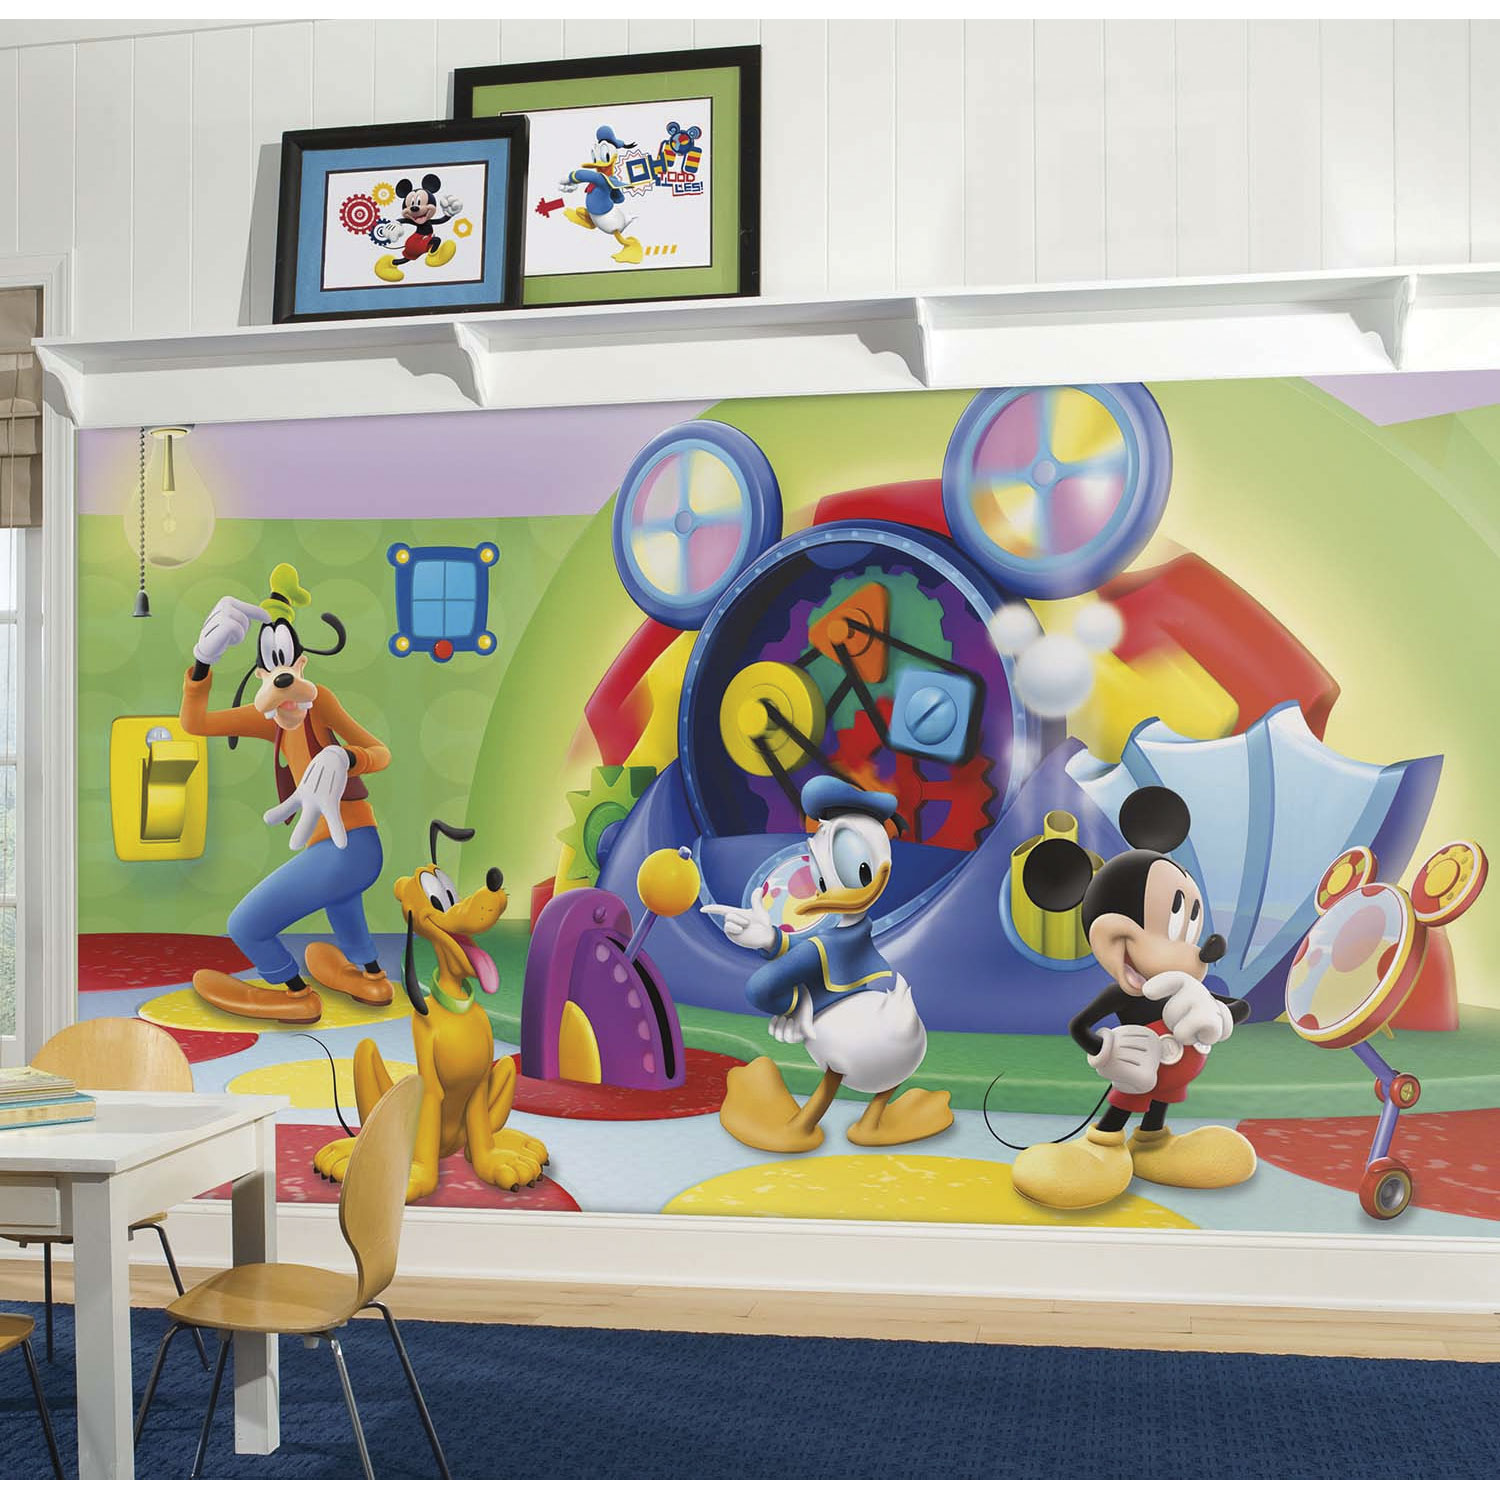 RoomMates Mickey Mouse Clubhouse Capers XL Wallpaper Mural